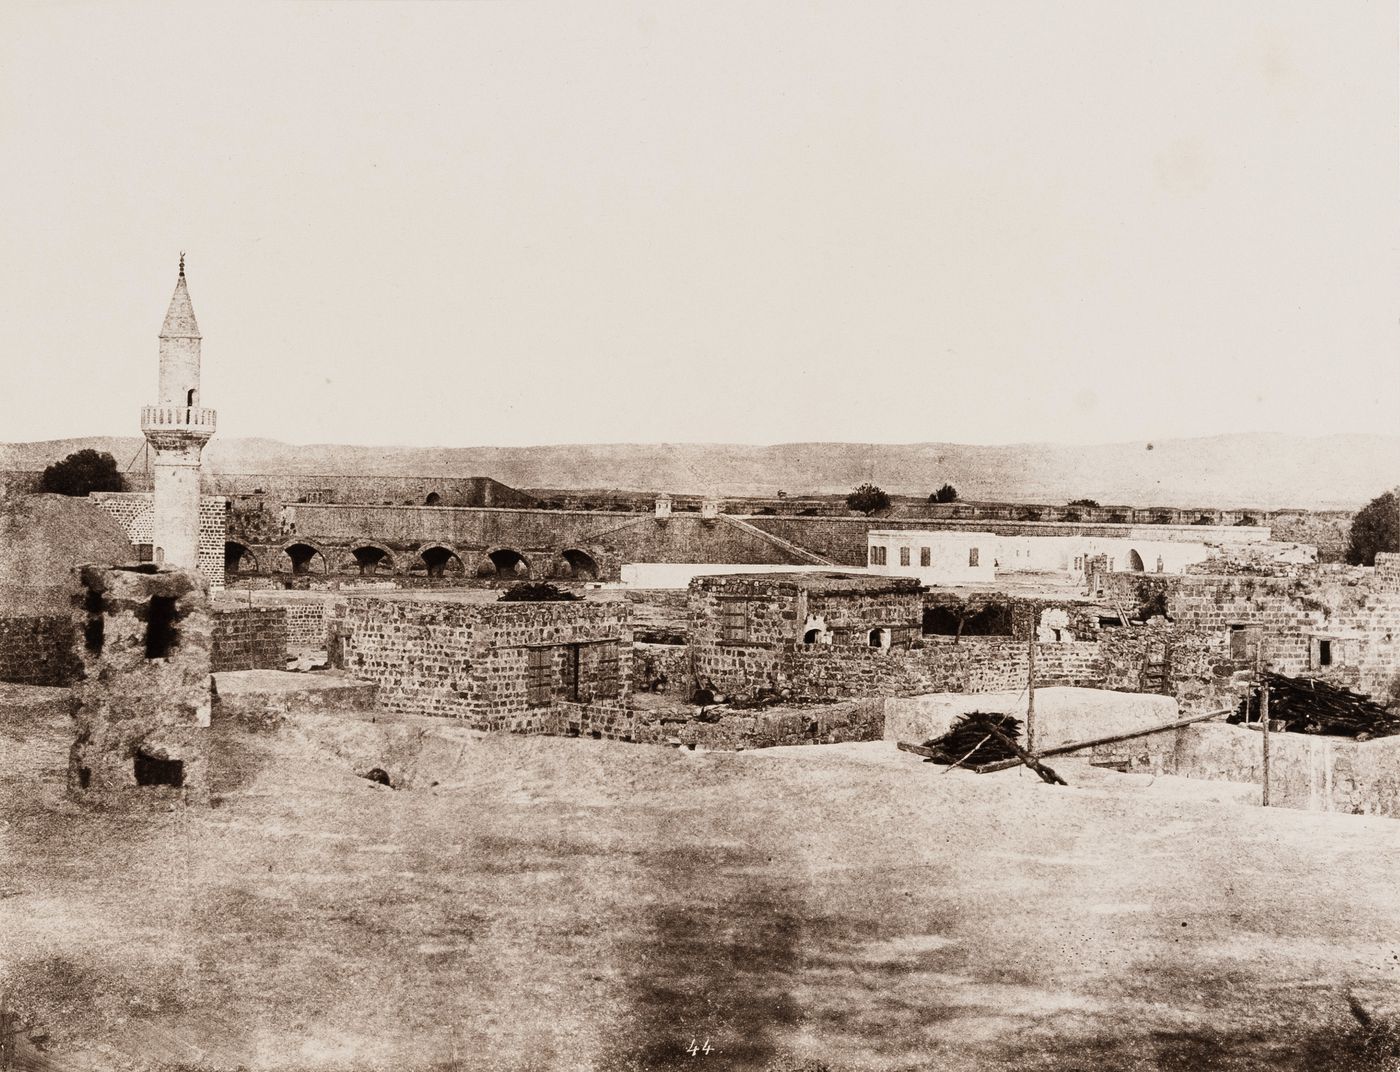 View of the French batteries with an aqueduct in the background, Acre, Ottoman Empire (now in Israel)